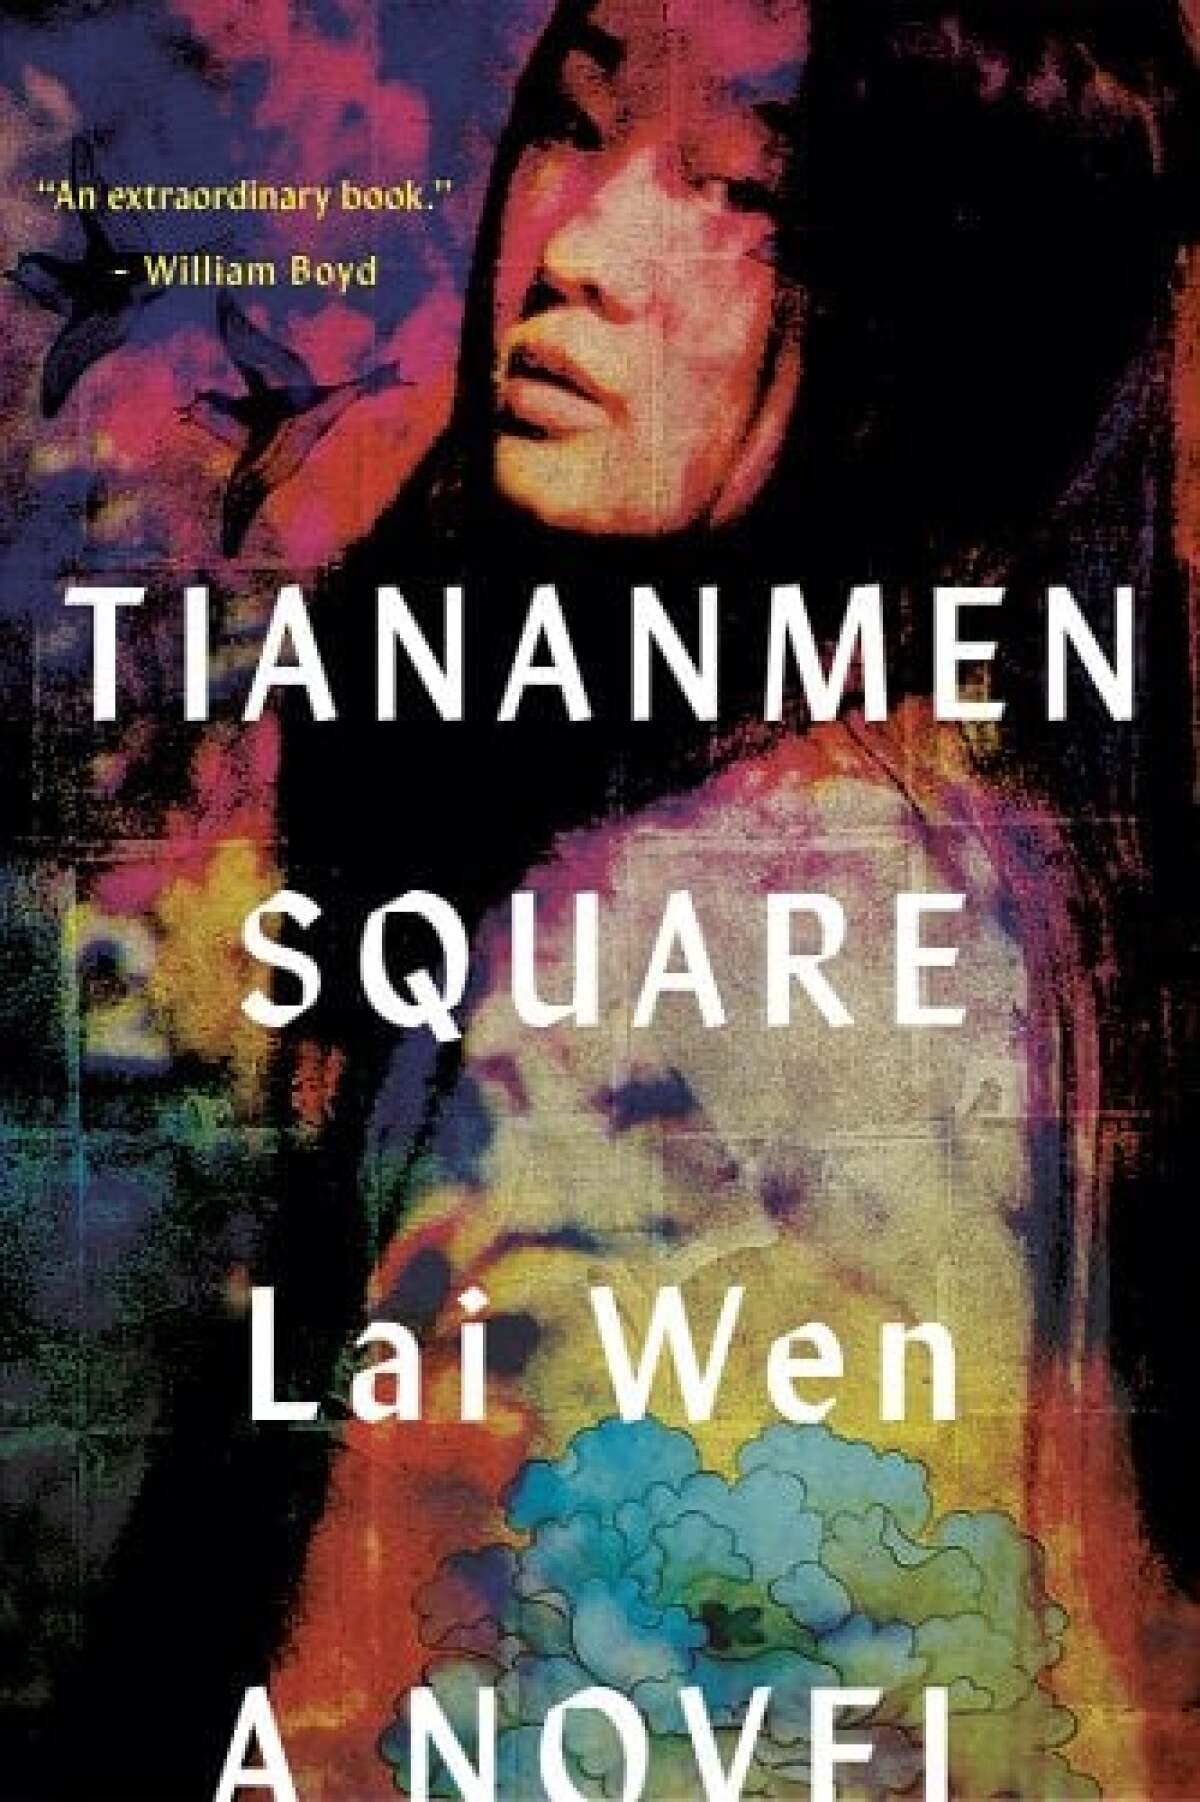 Cover from "Tiananmen Square"